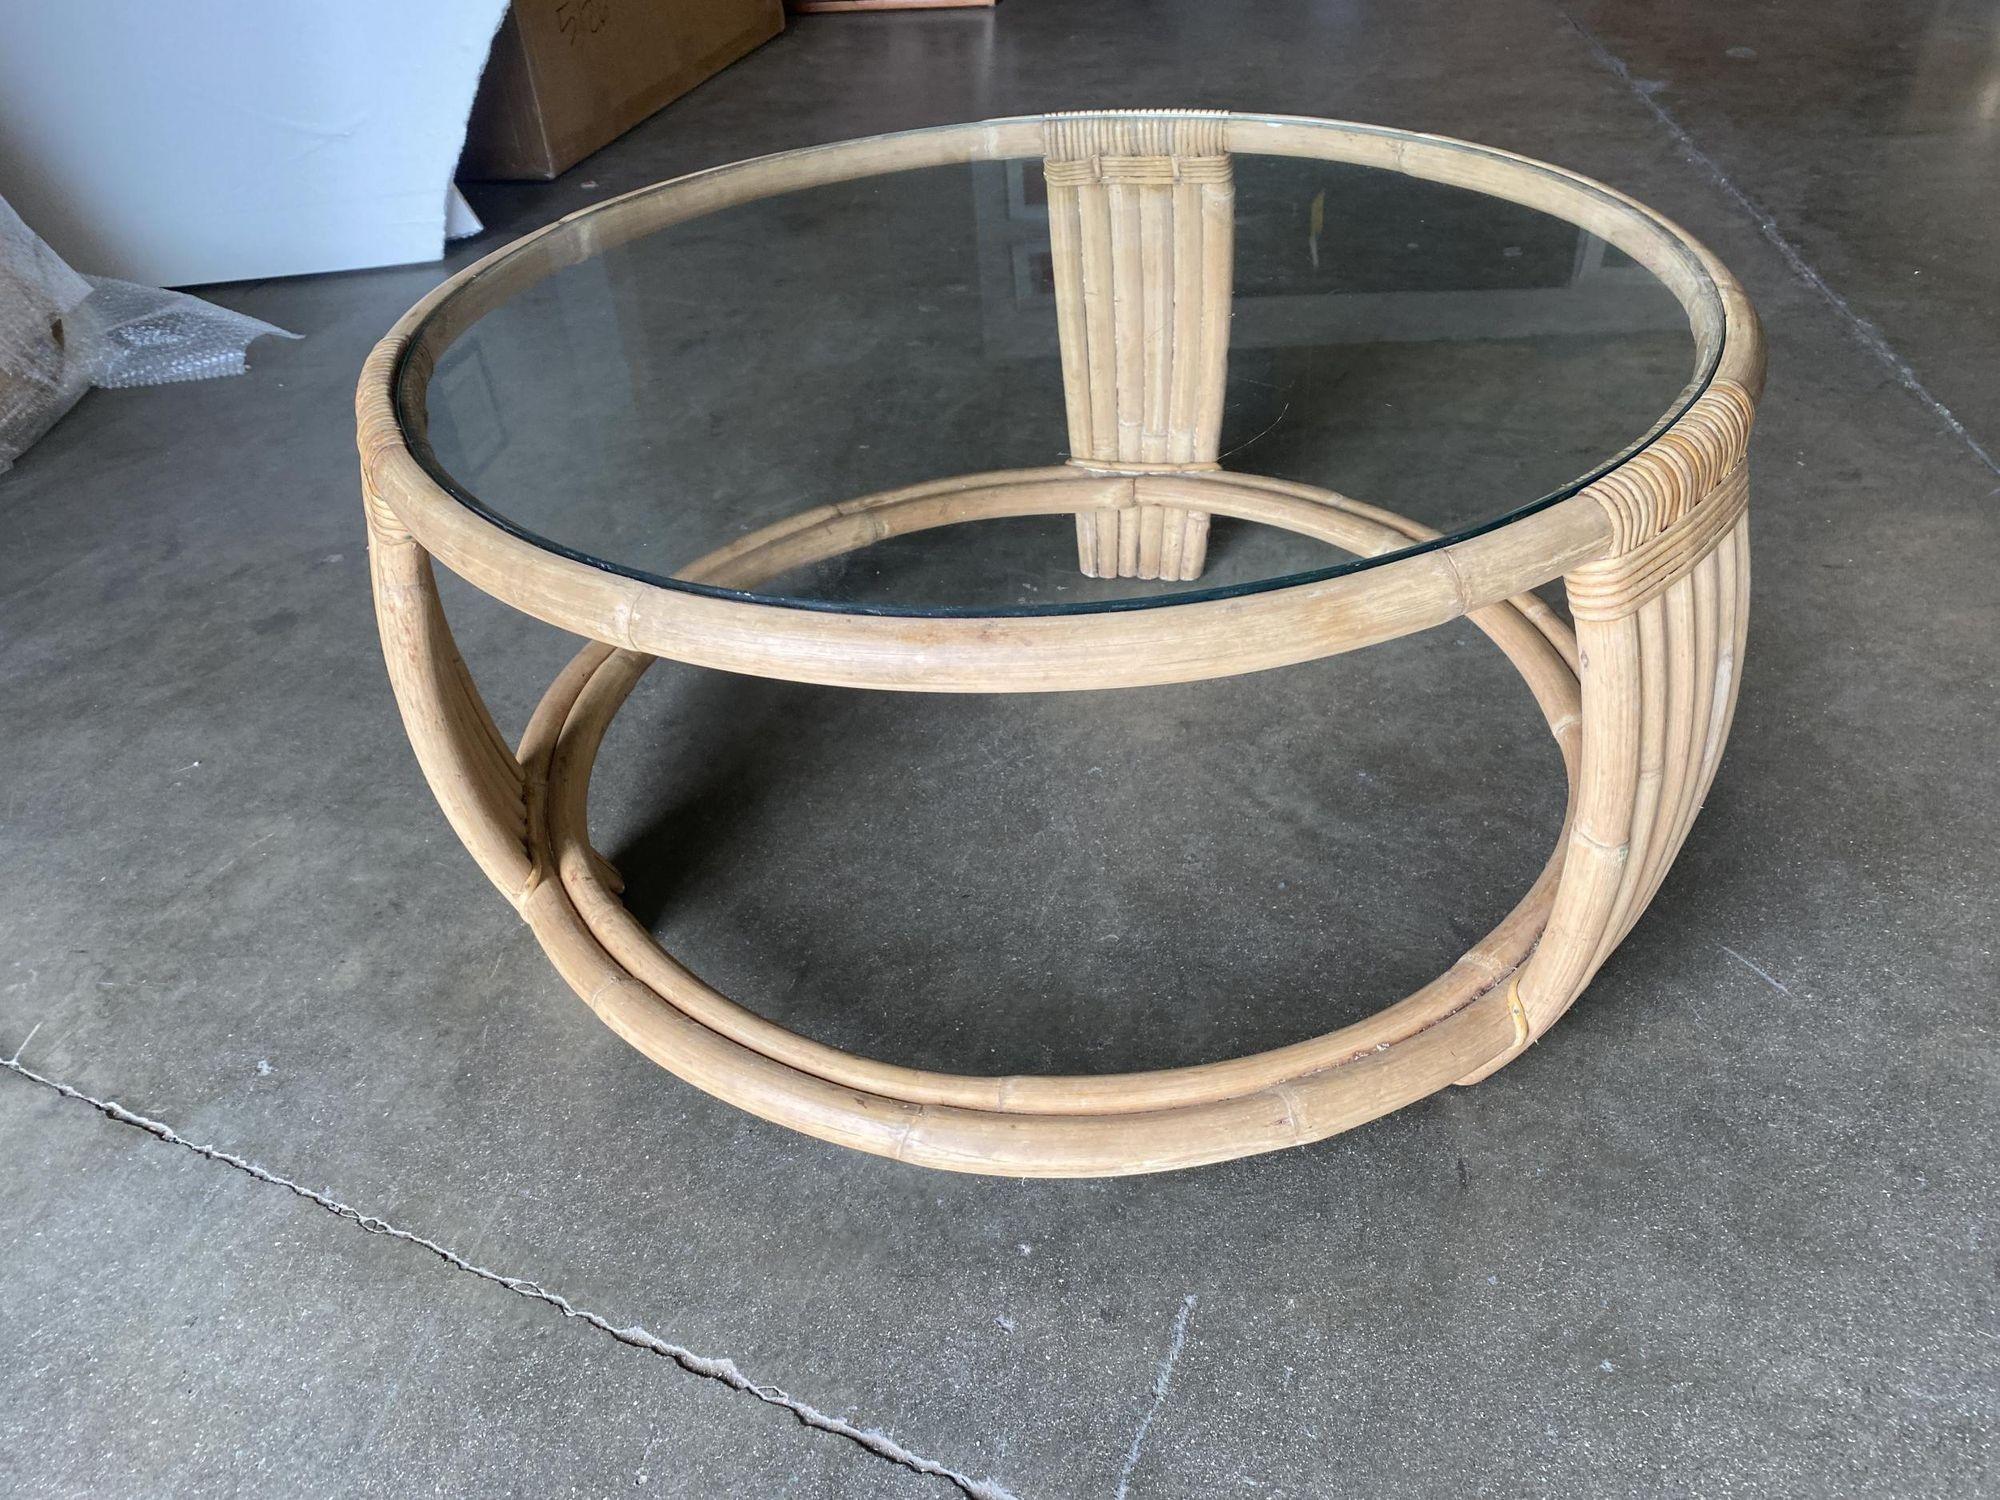 Five Strand Rattan Coffee Table with Glass Top In Excellent Condition For Sale In Van Nuys, CA